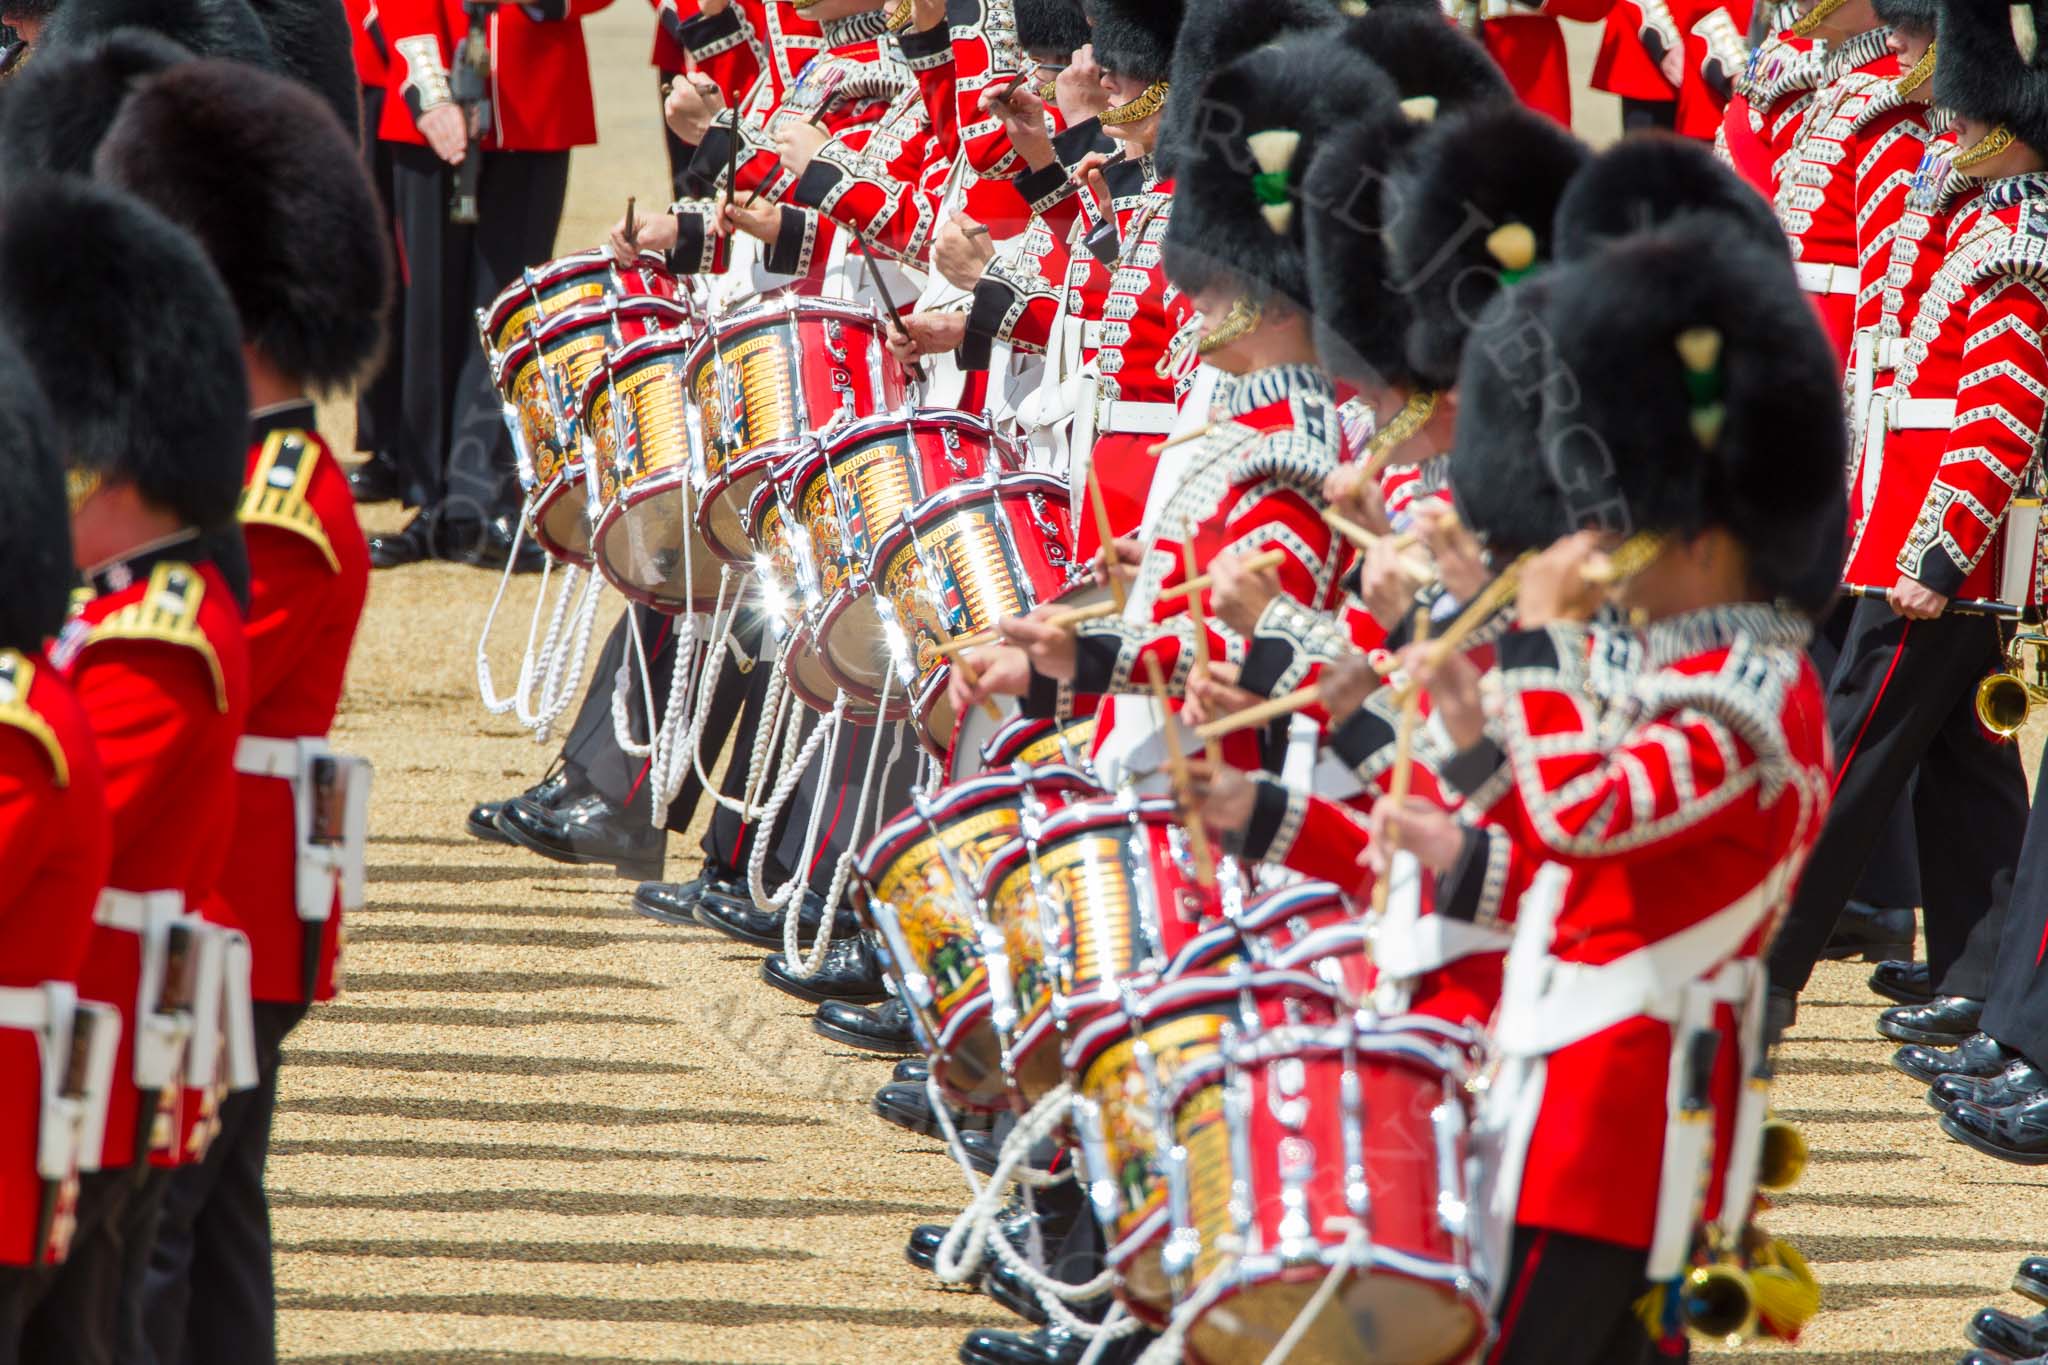 The Colonel's Review 2013: Tthe Massed Bands as they are playing the Grenadiers Slow March..
Horse Guards Parade, Westminster,
London SW1,

United Kingdom,
on 08 June 2013 at 11:24, image #566